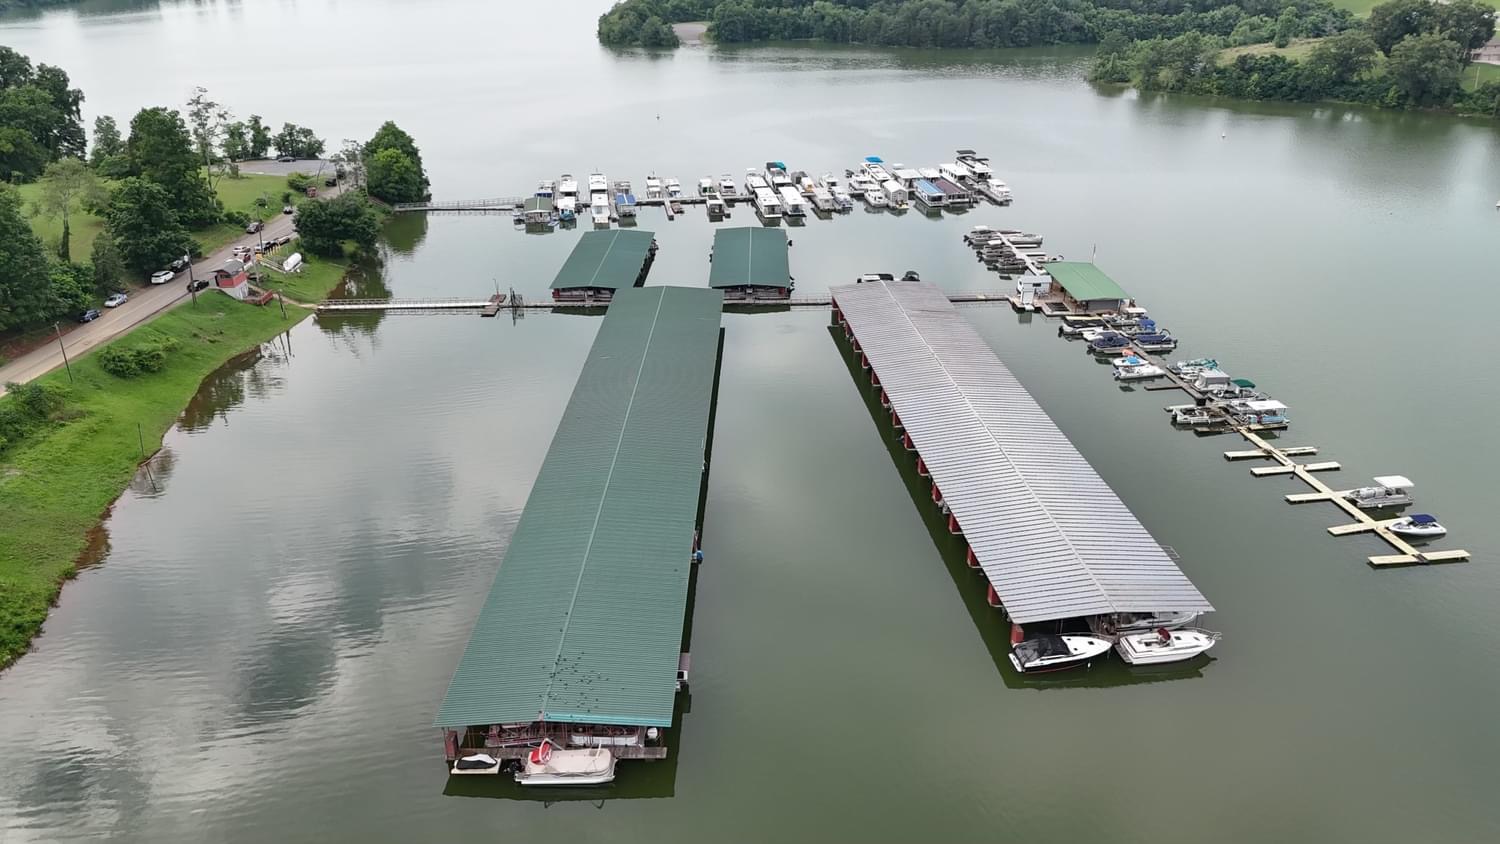 REVITALIZING CHEROKEE BOAT DOCK IN MORRISTOWN, TN WITH RAMOS ROD CONSTRUCTION